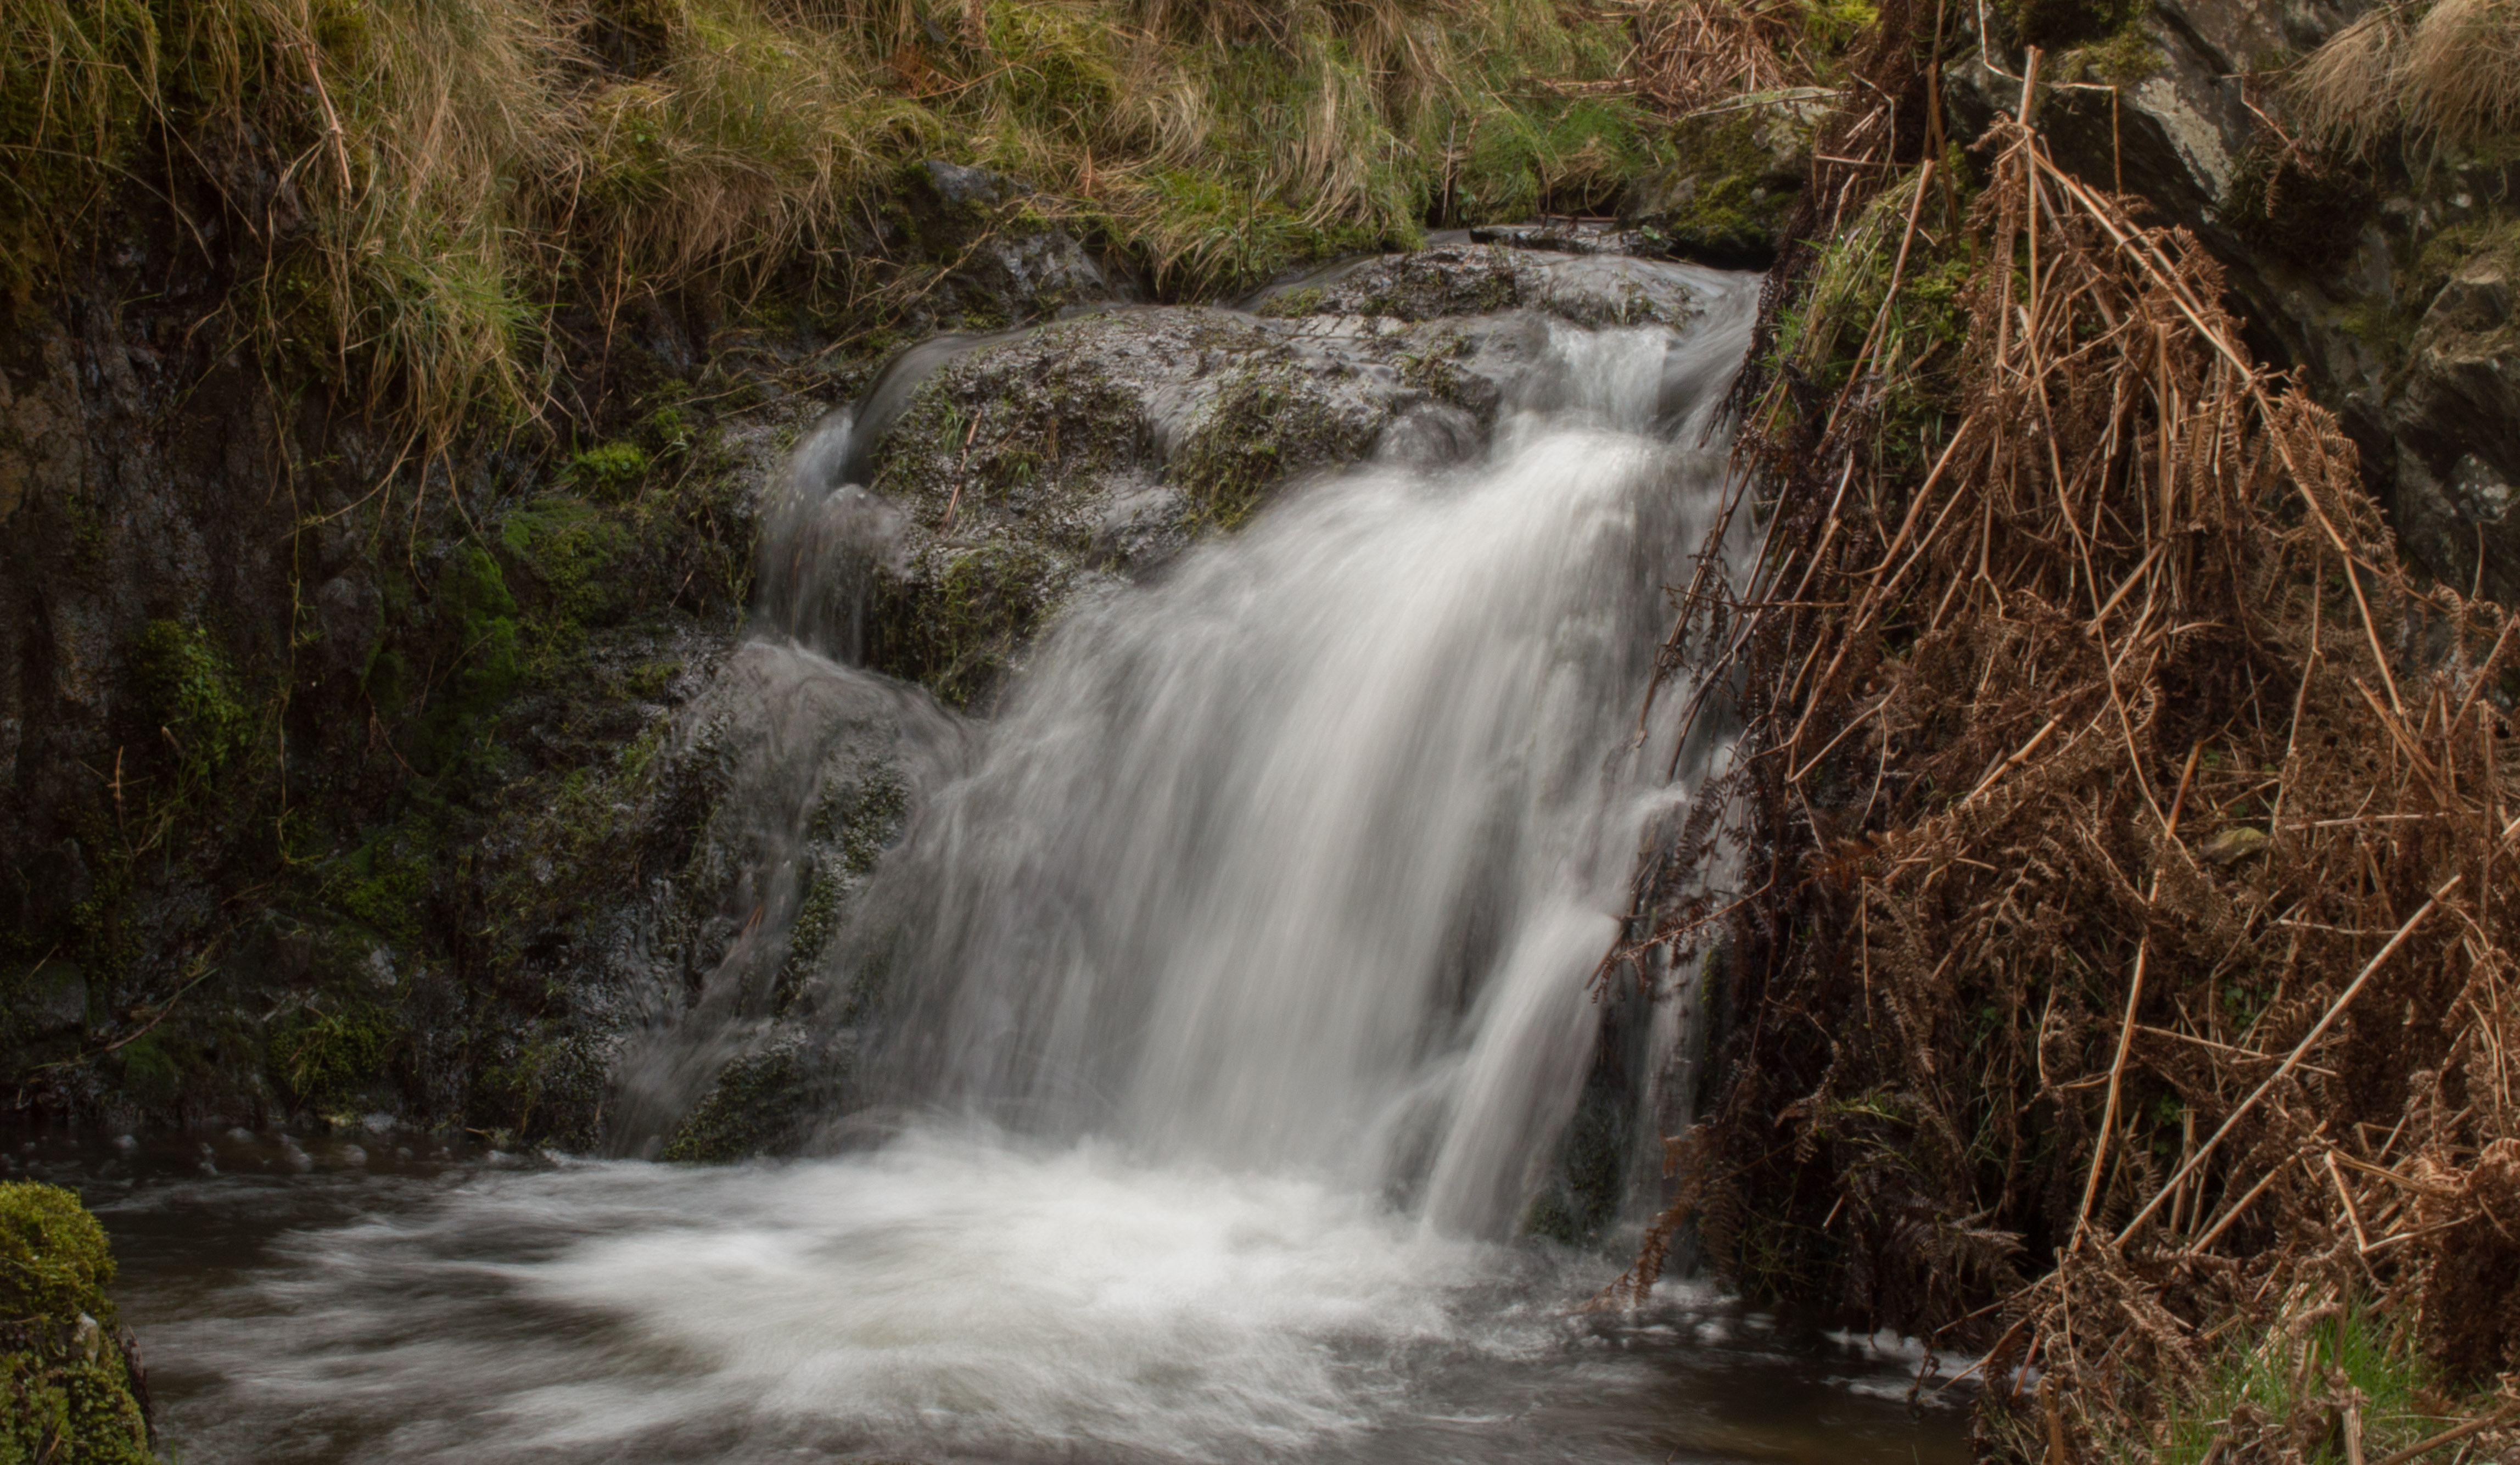 cardingmill valley waterfall (103 of 218)